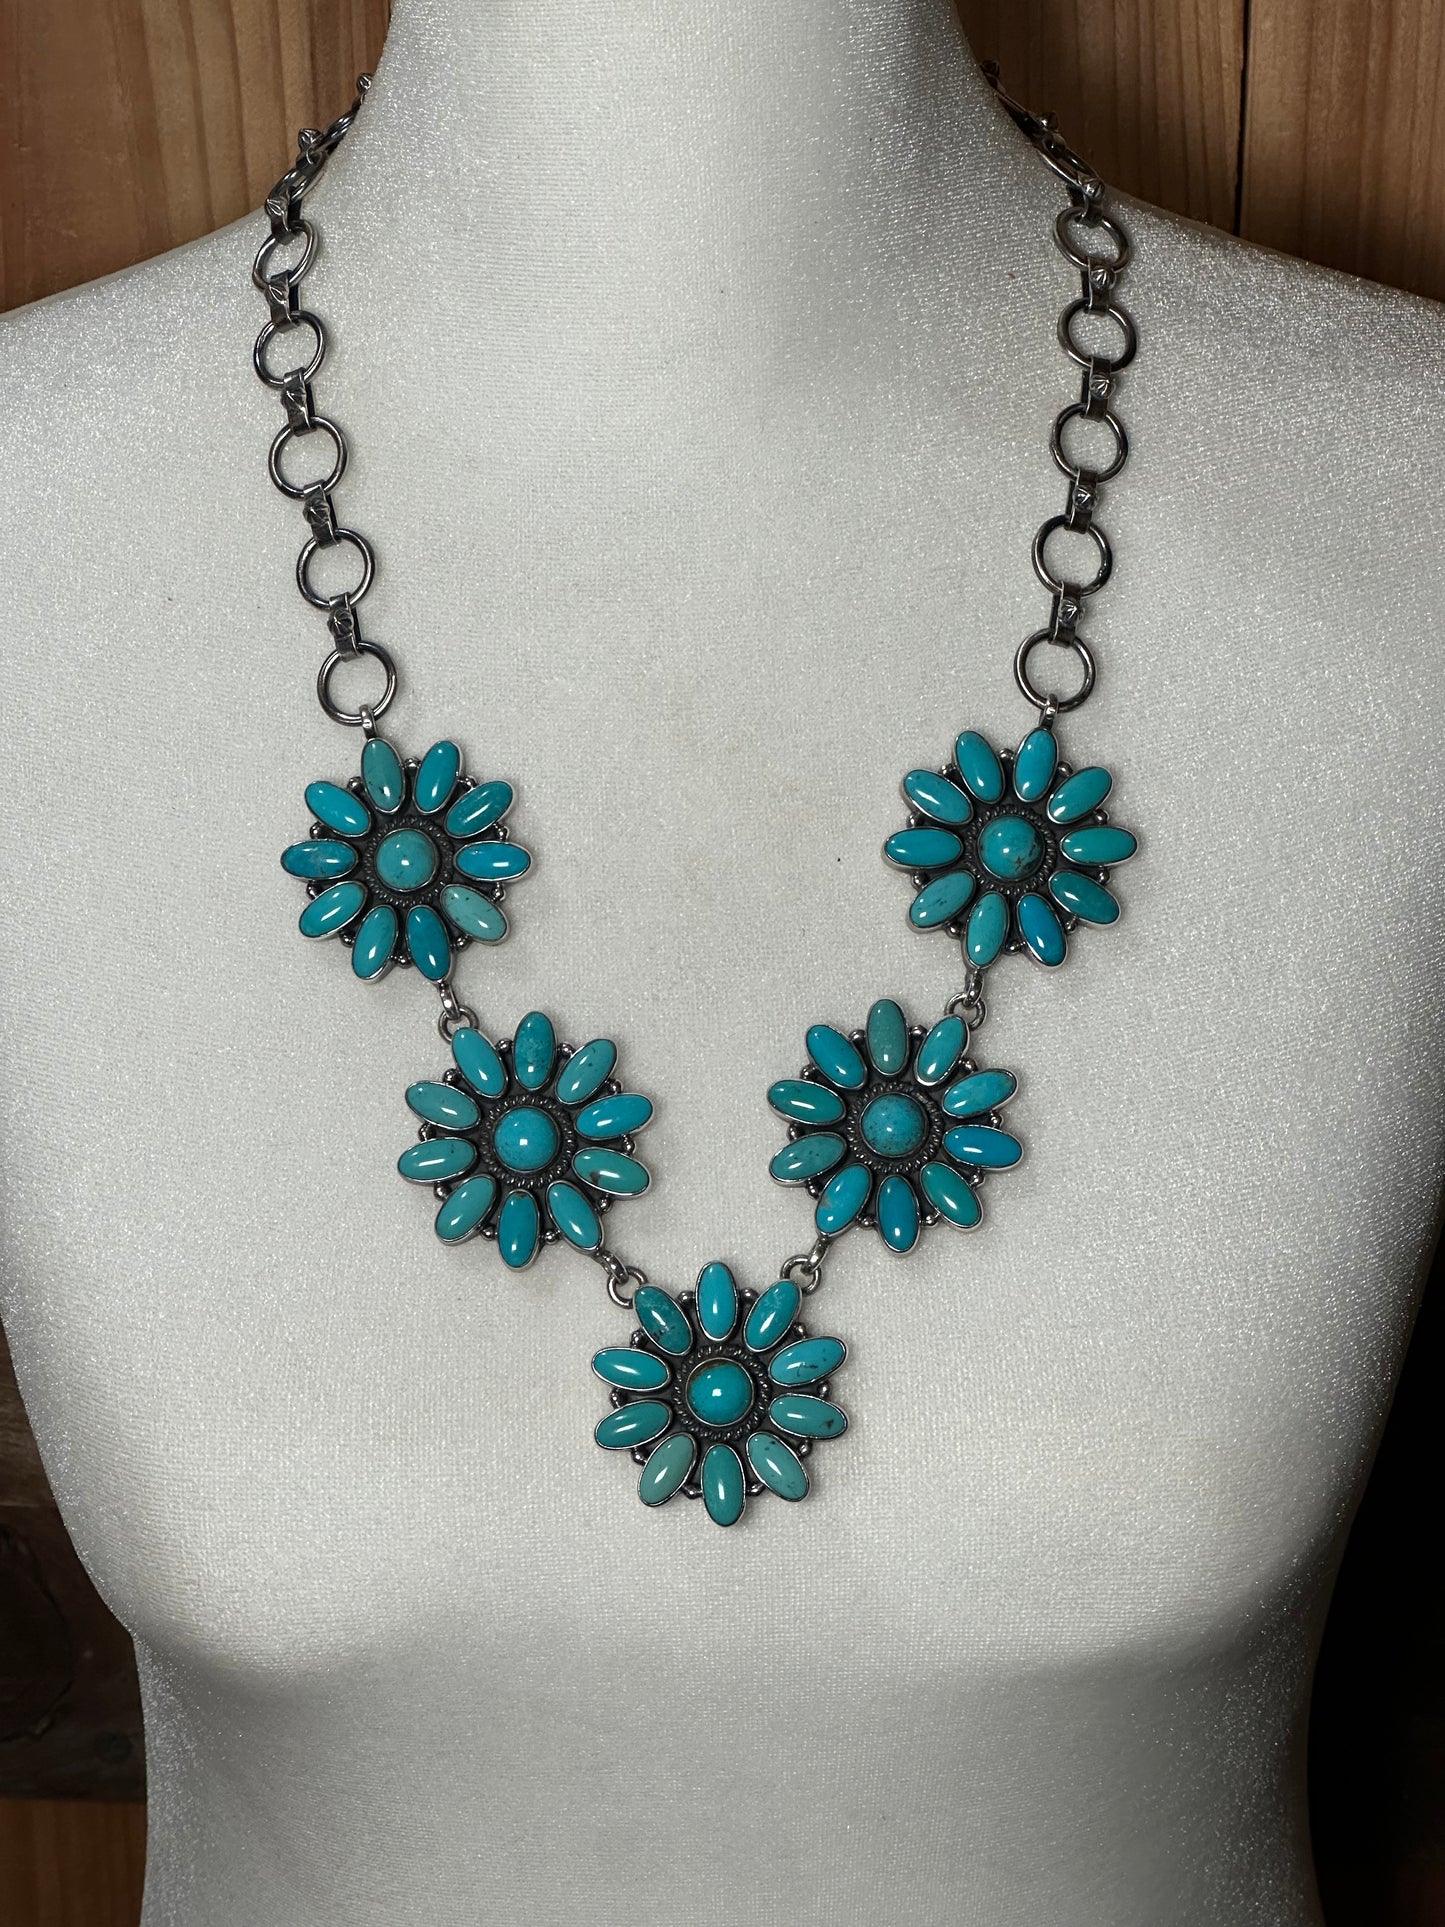 24” Sleeping Beauty Turquoise Flower Necklace by Zia